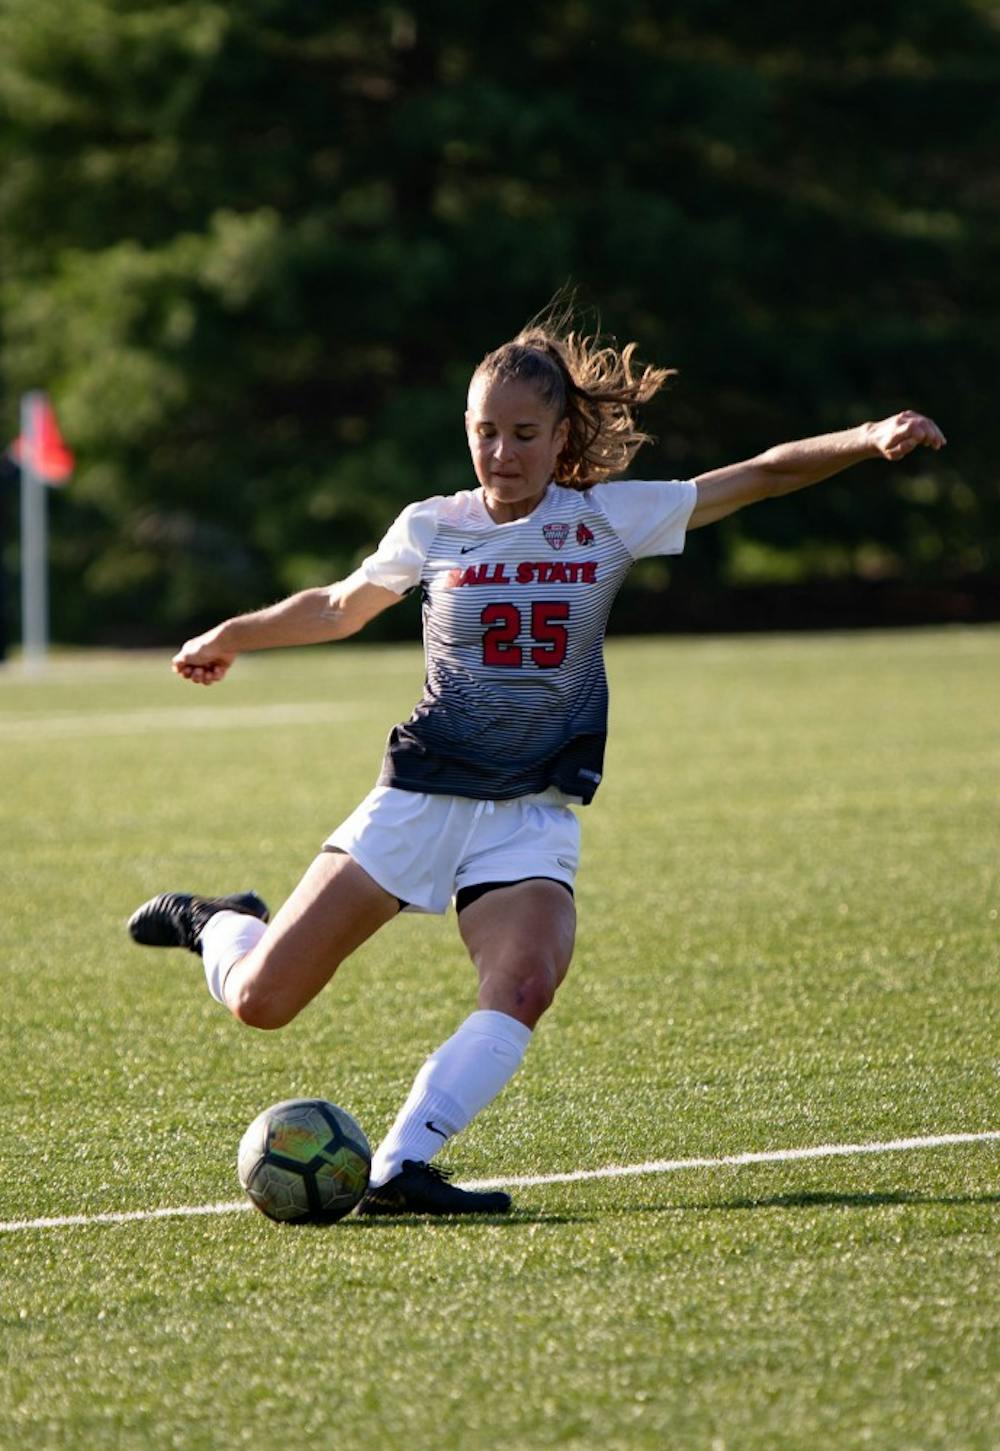 <p>Senior Defender Yela Ziswiler kicks the ball during the second half of the game Thursday, Aug. 28, 2019 at Briner Sports Complex. &nbsp;Ball State Woman's soccer team defeated Illinois State University 1-0. <strong>Rebecca Slezak, DN</strong></p>